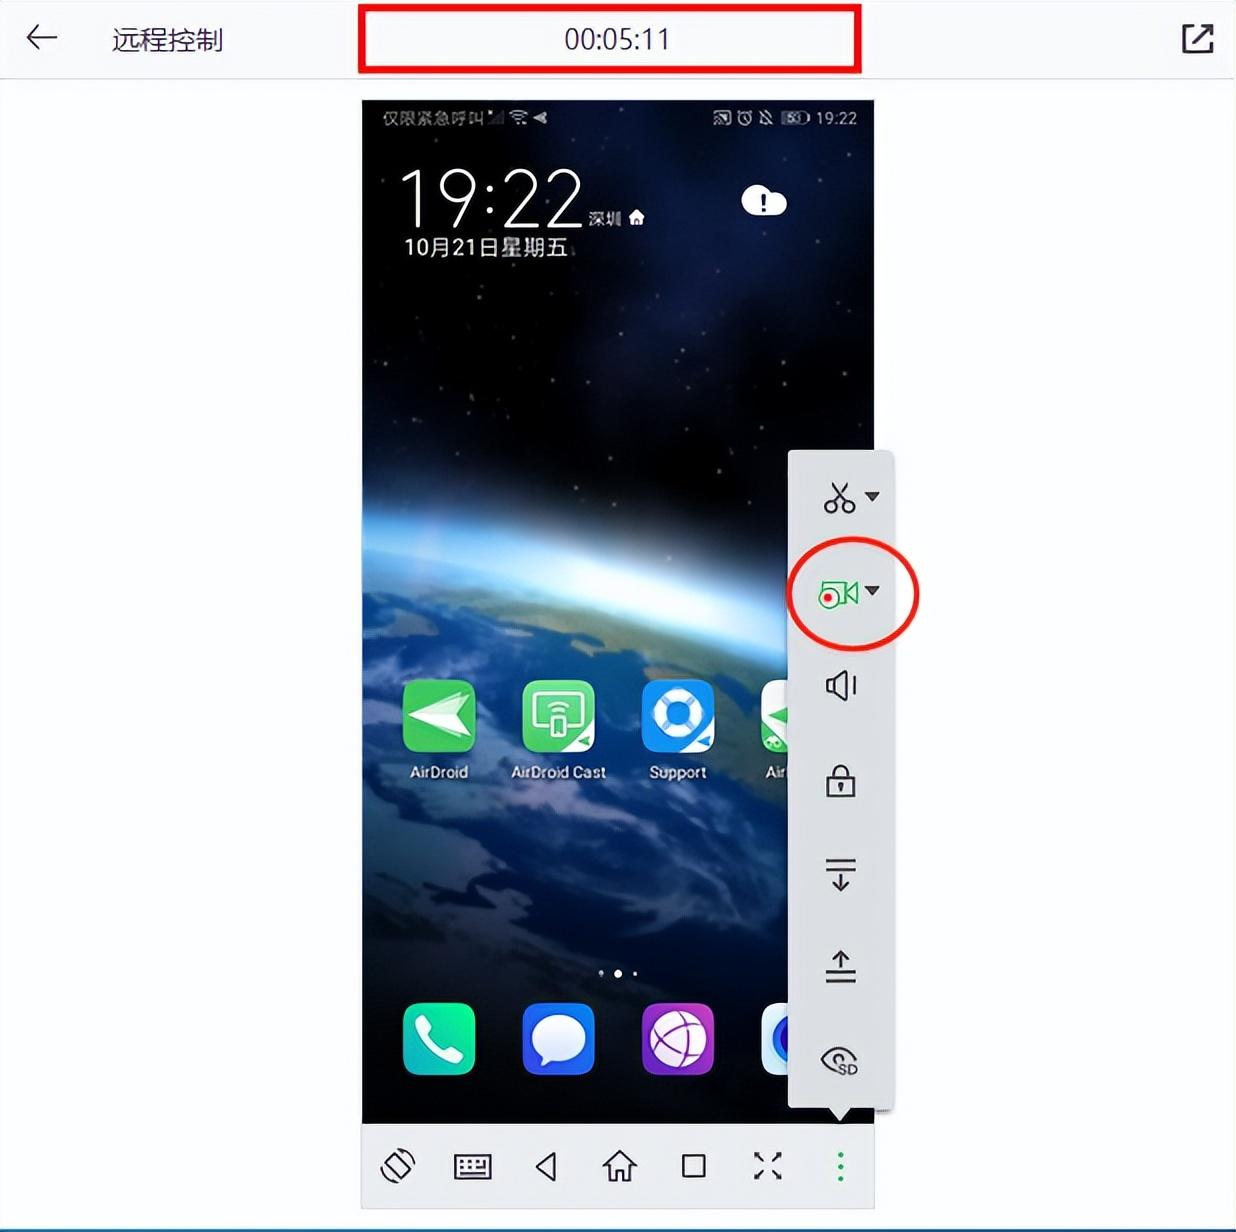 android 录制视频 surface插图新简1